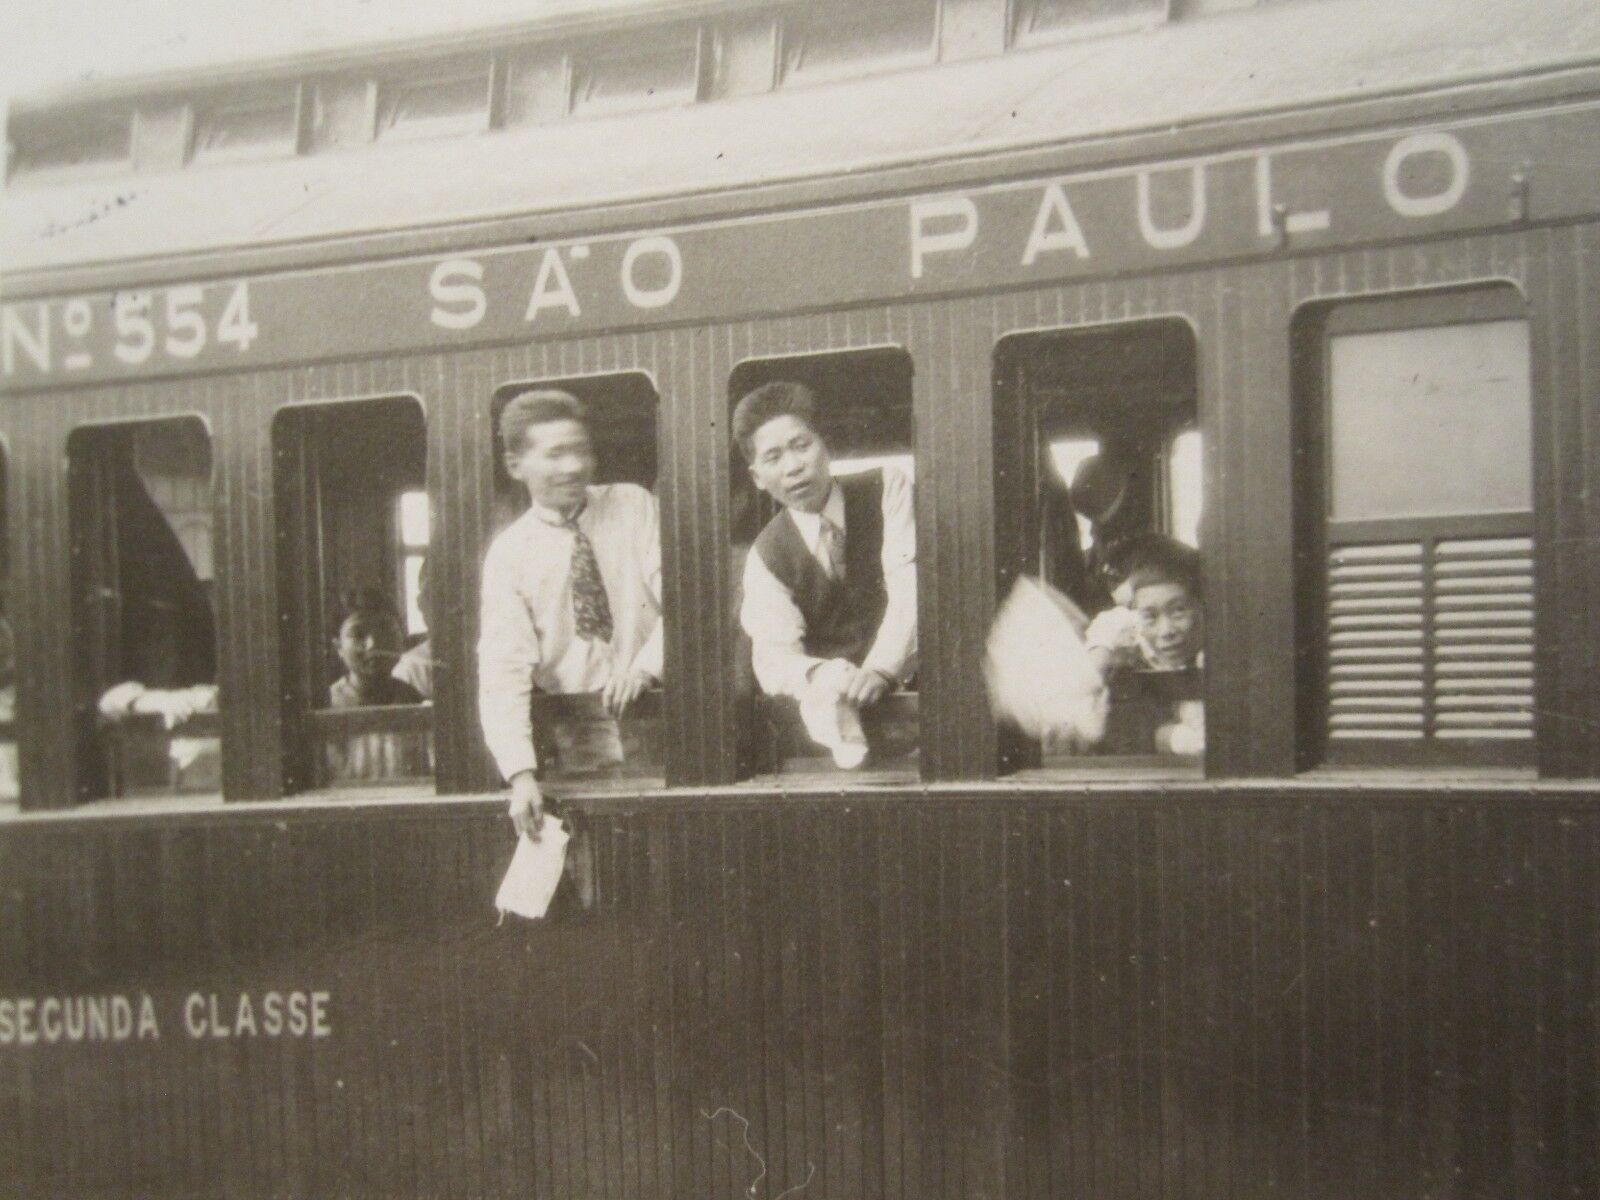 ANTIQUE 1920s CHINESE IMMIGRANTS SAO PAULO BRAZIL RAILWAY RR SECOND CLASS PHOTO